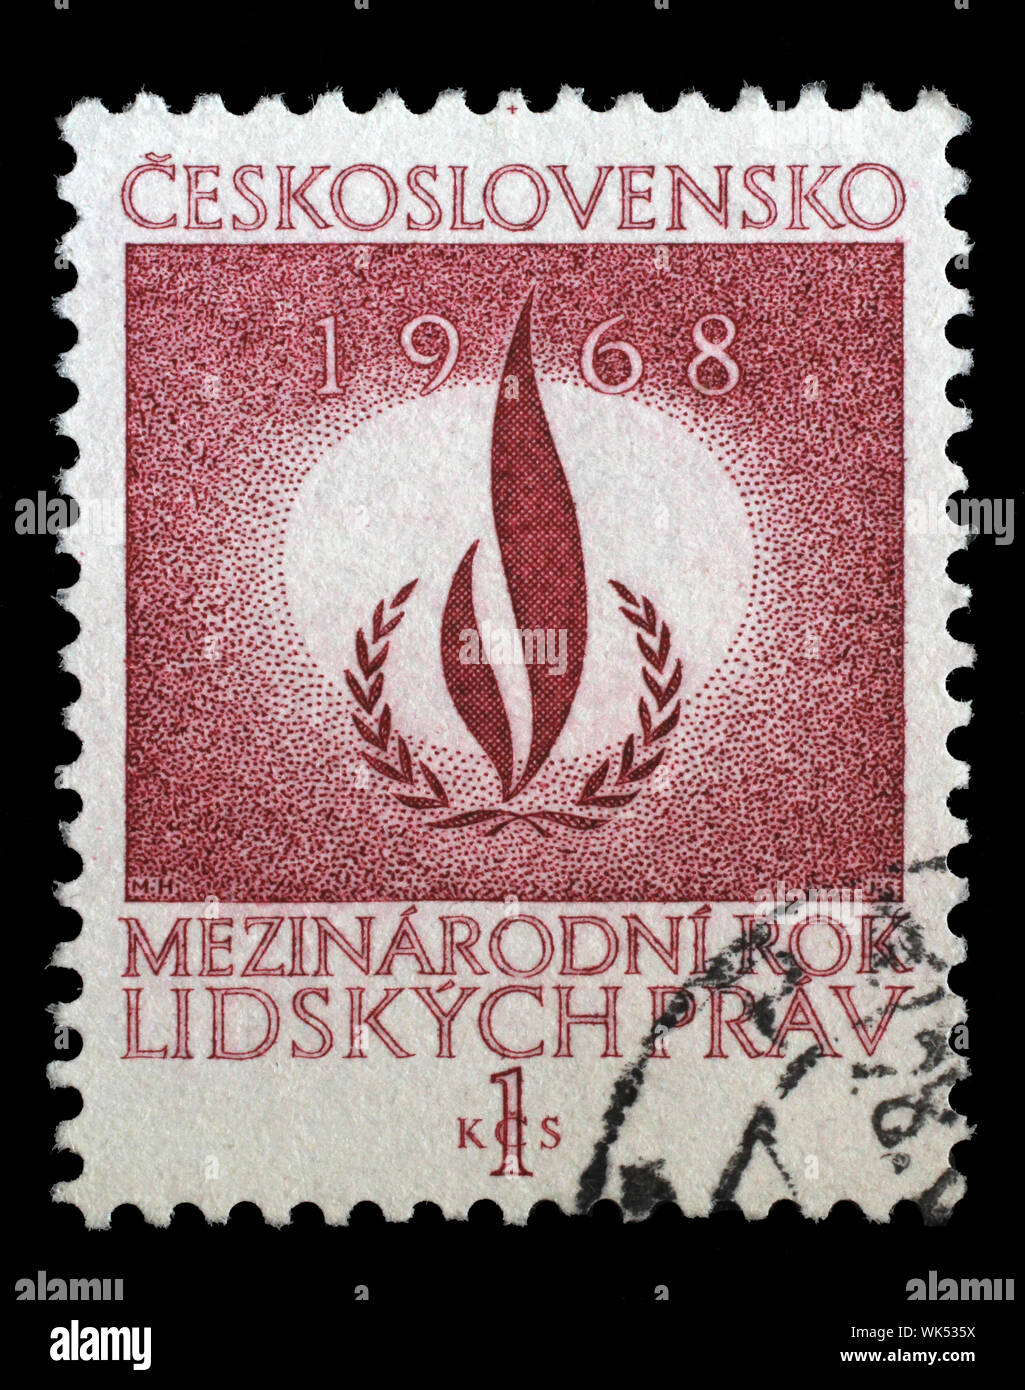 Stamp printed in Czechoslovakia, shows International Year of Human Rights, circa 1968. Stock Photo